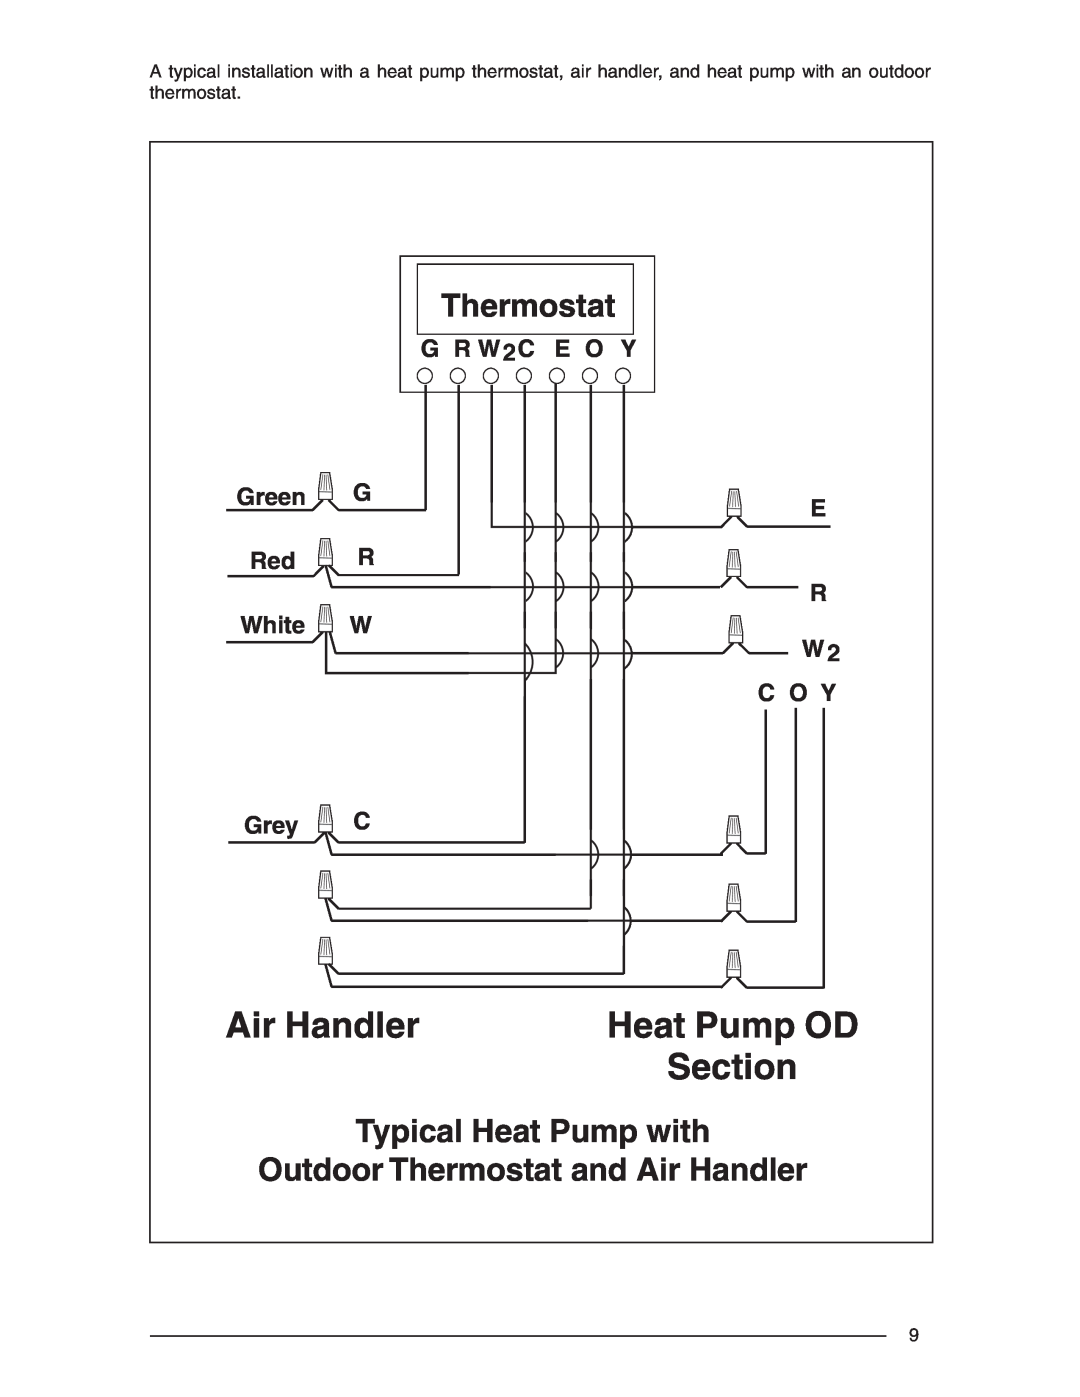 Nordyne R-410A Heat Pump OD, Typical Heat Pump with, Outdoor Thermostat and Air Handler, Section, G R W 2C, E O Y 